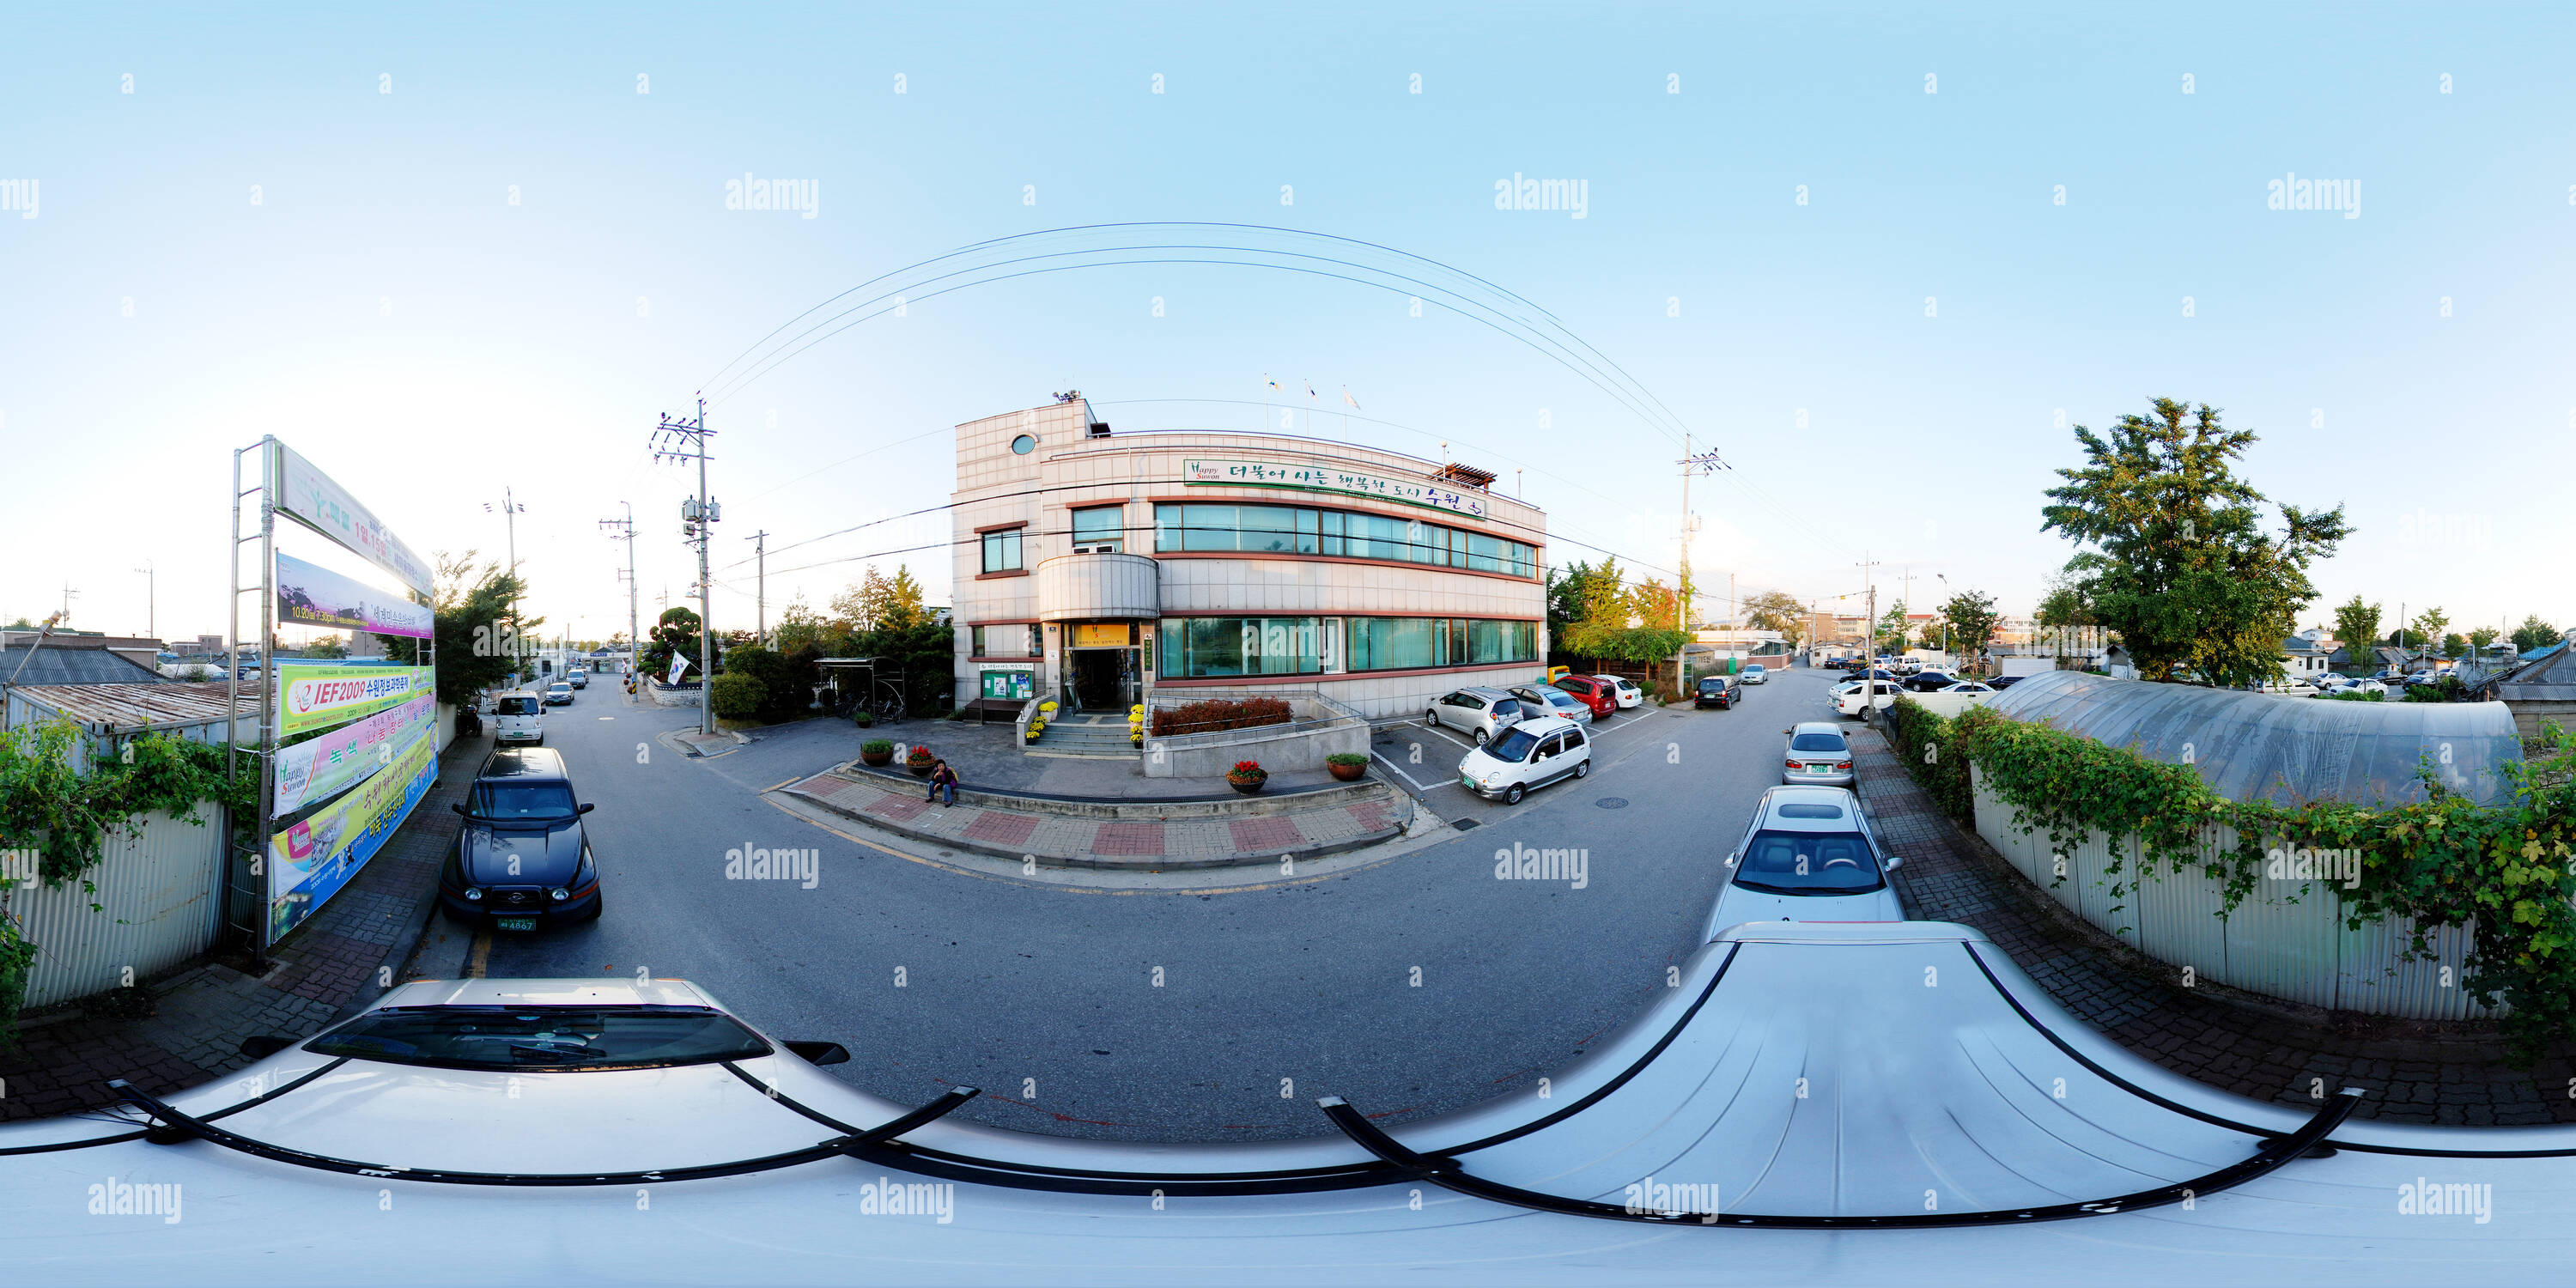 360 degree panoramic view of Pyeong Community Service Center